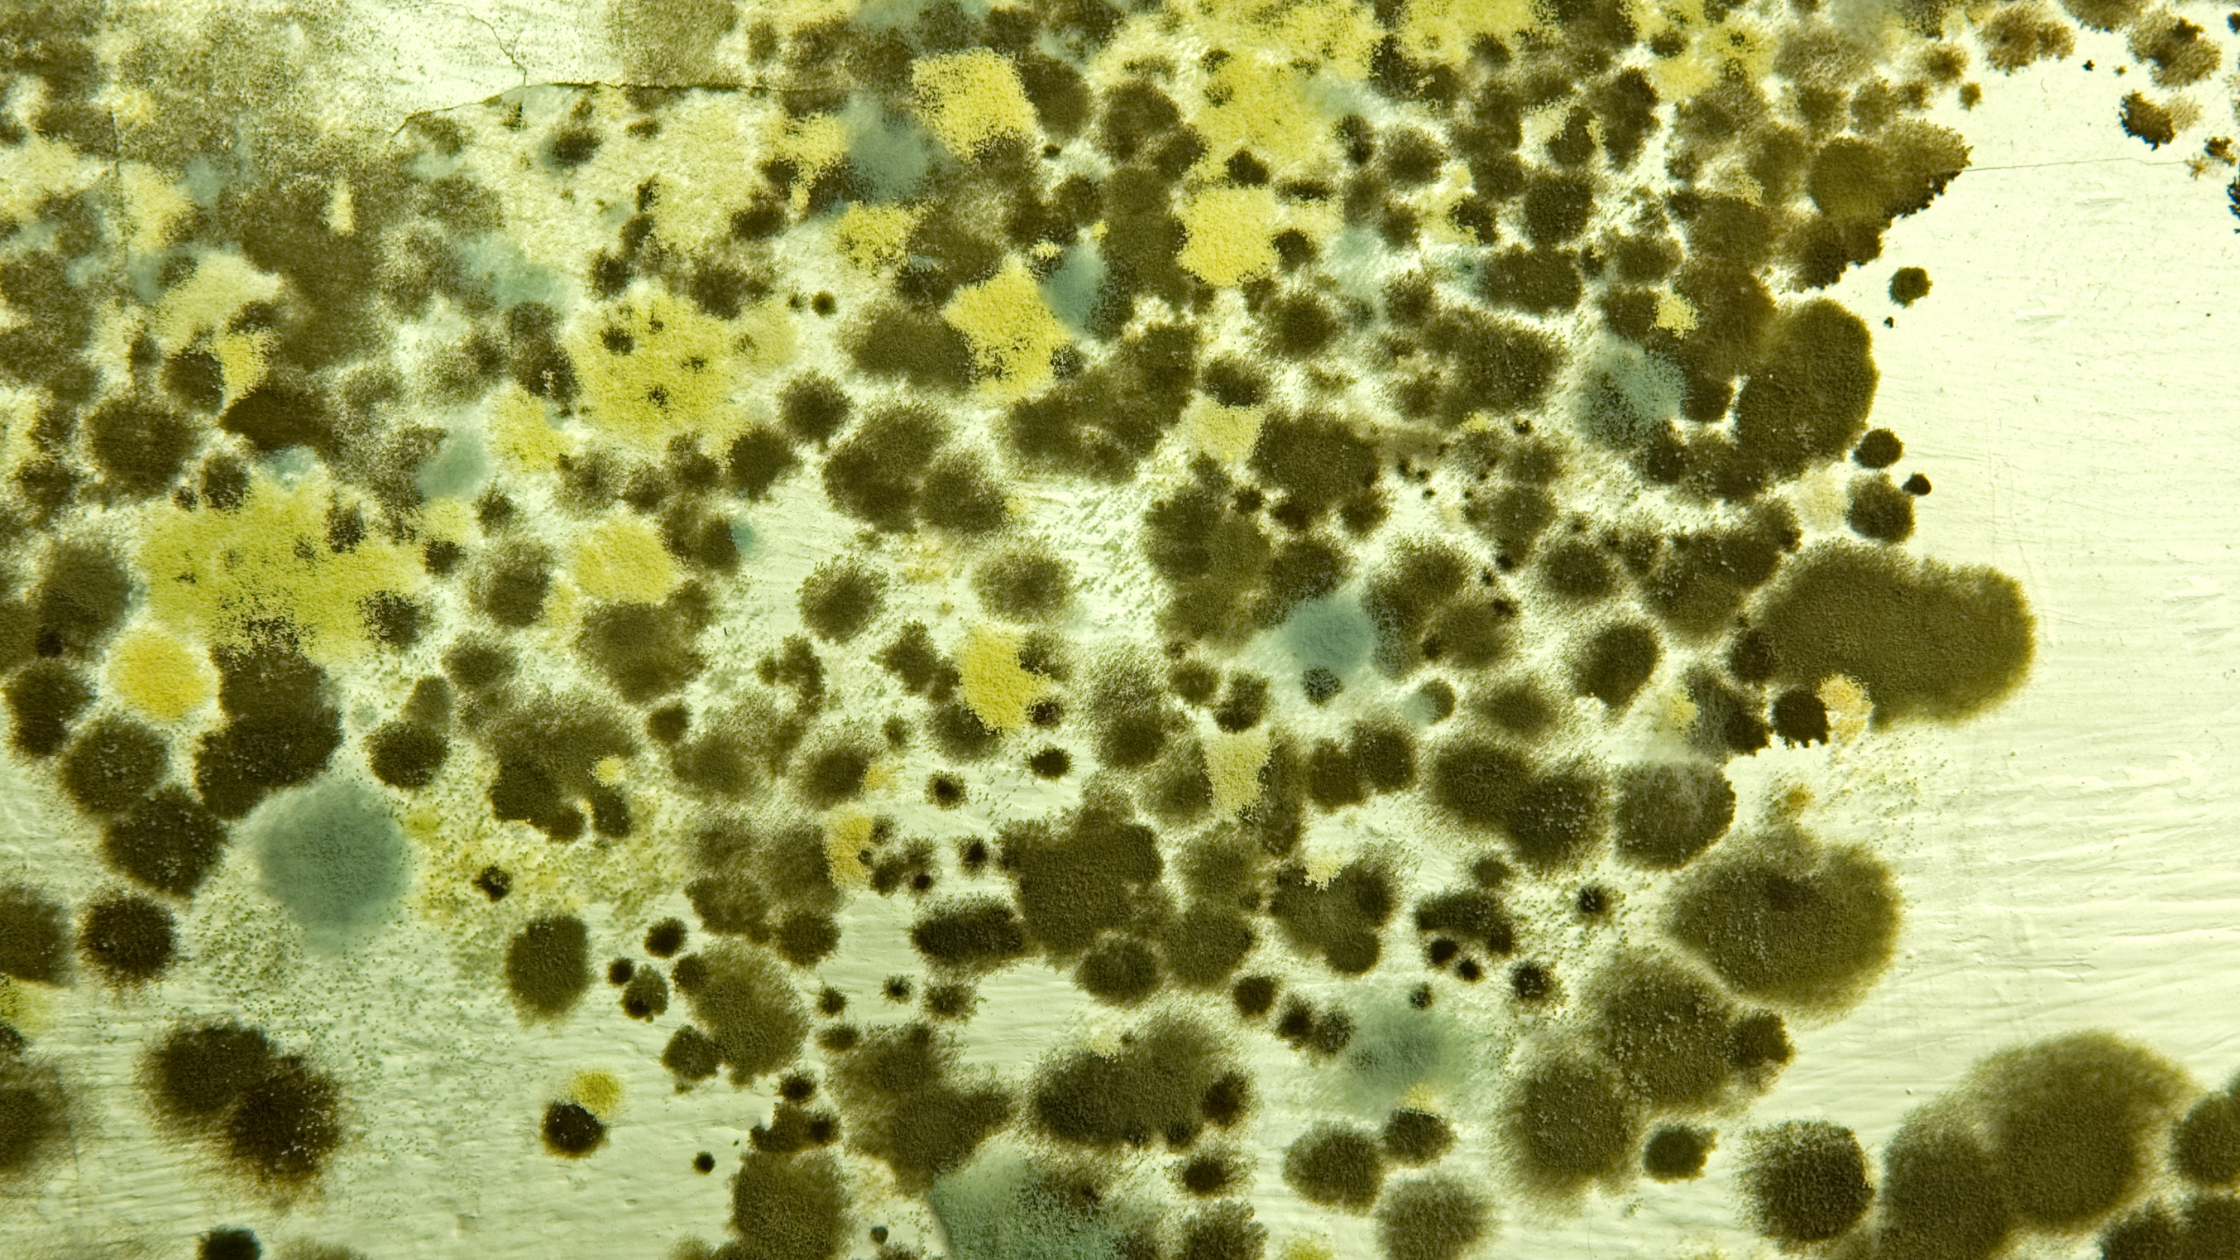 fuzzy green, grey, and yellow mold on a wall